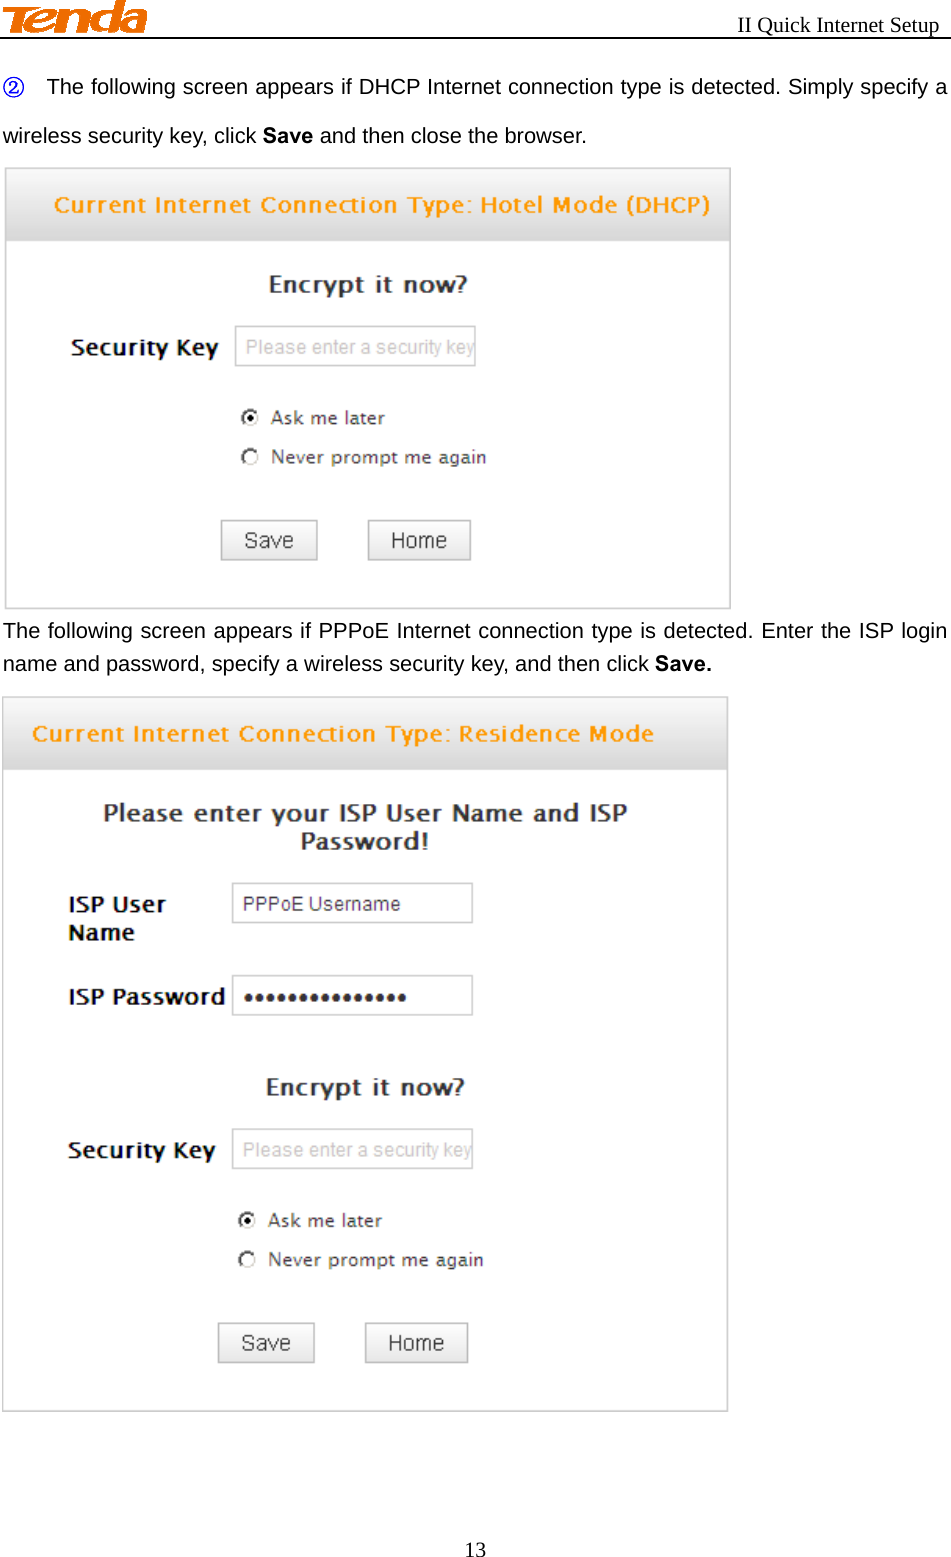                                                       II Quick Internet Setup 13 ② The following screen appears if DHCP Internet connection type is detected. Simply specify a wireless security key, click Save and then close the browser.  The following screen appears if PPPoE Internet connection type is detected. Enter the ISP login name and password, specify a wireless security key, and then click Save.  